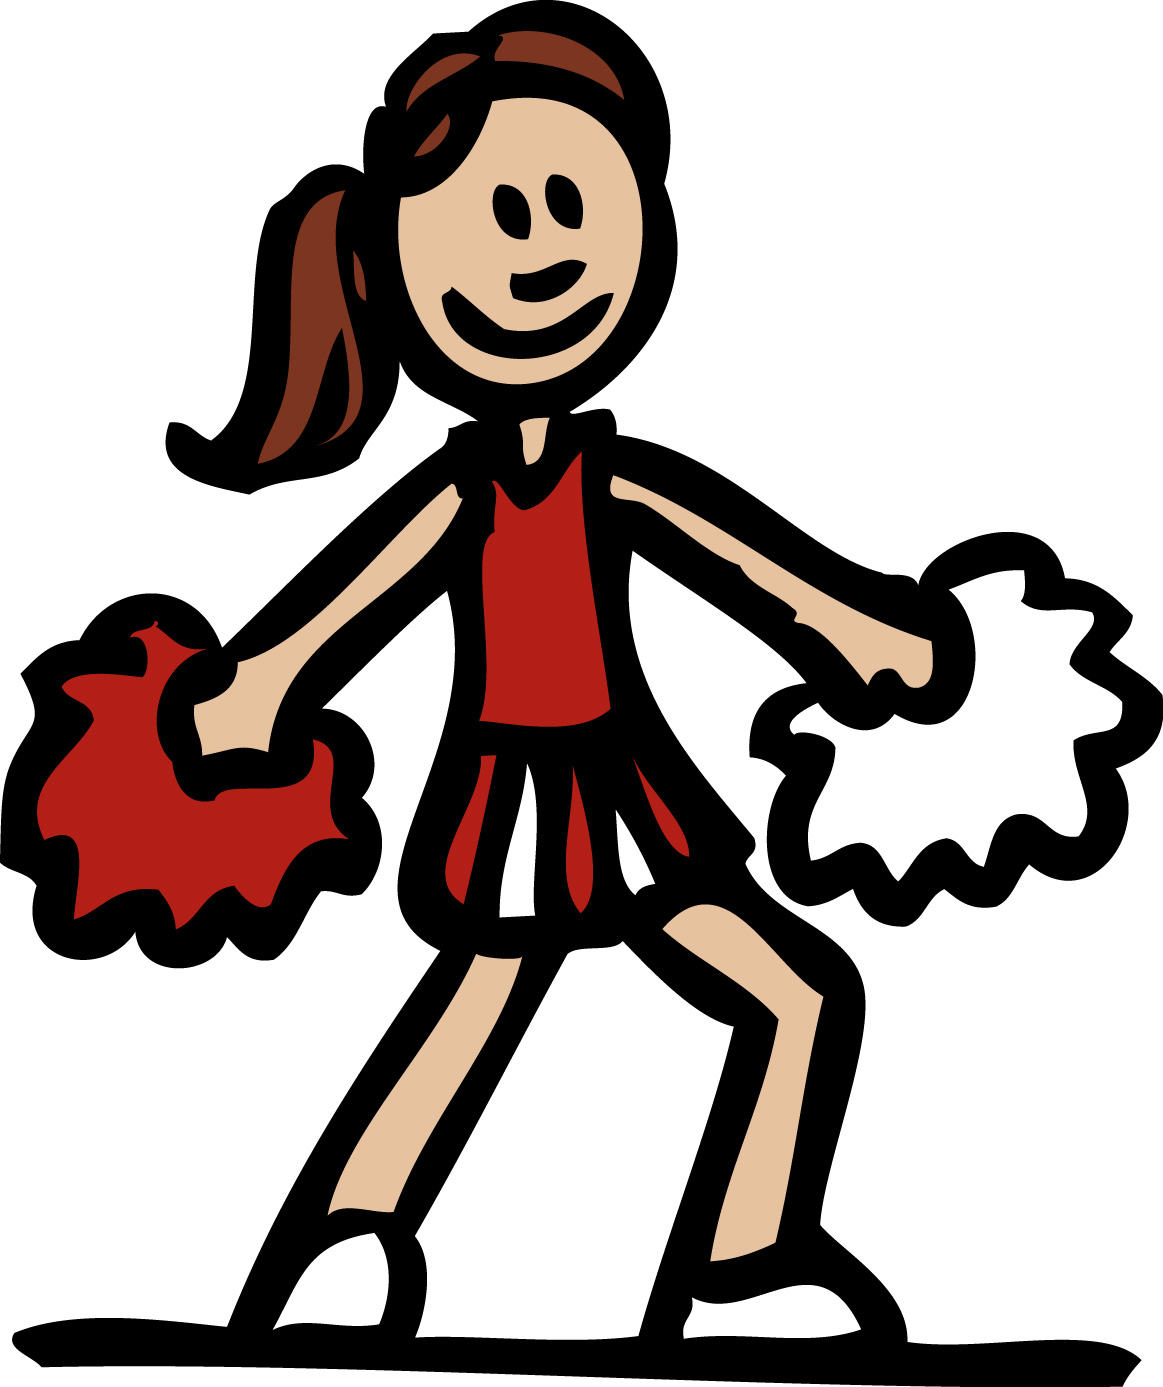 Cheer megaphone clipart free images